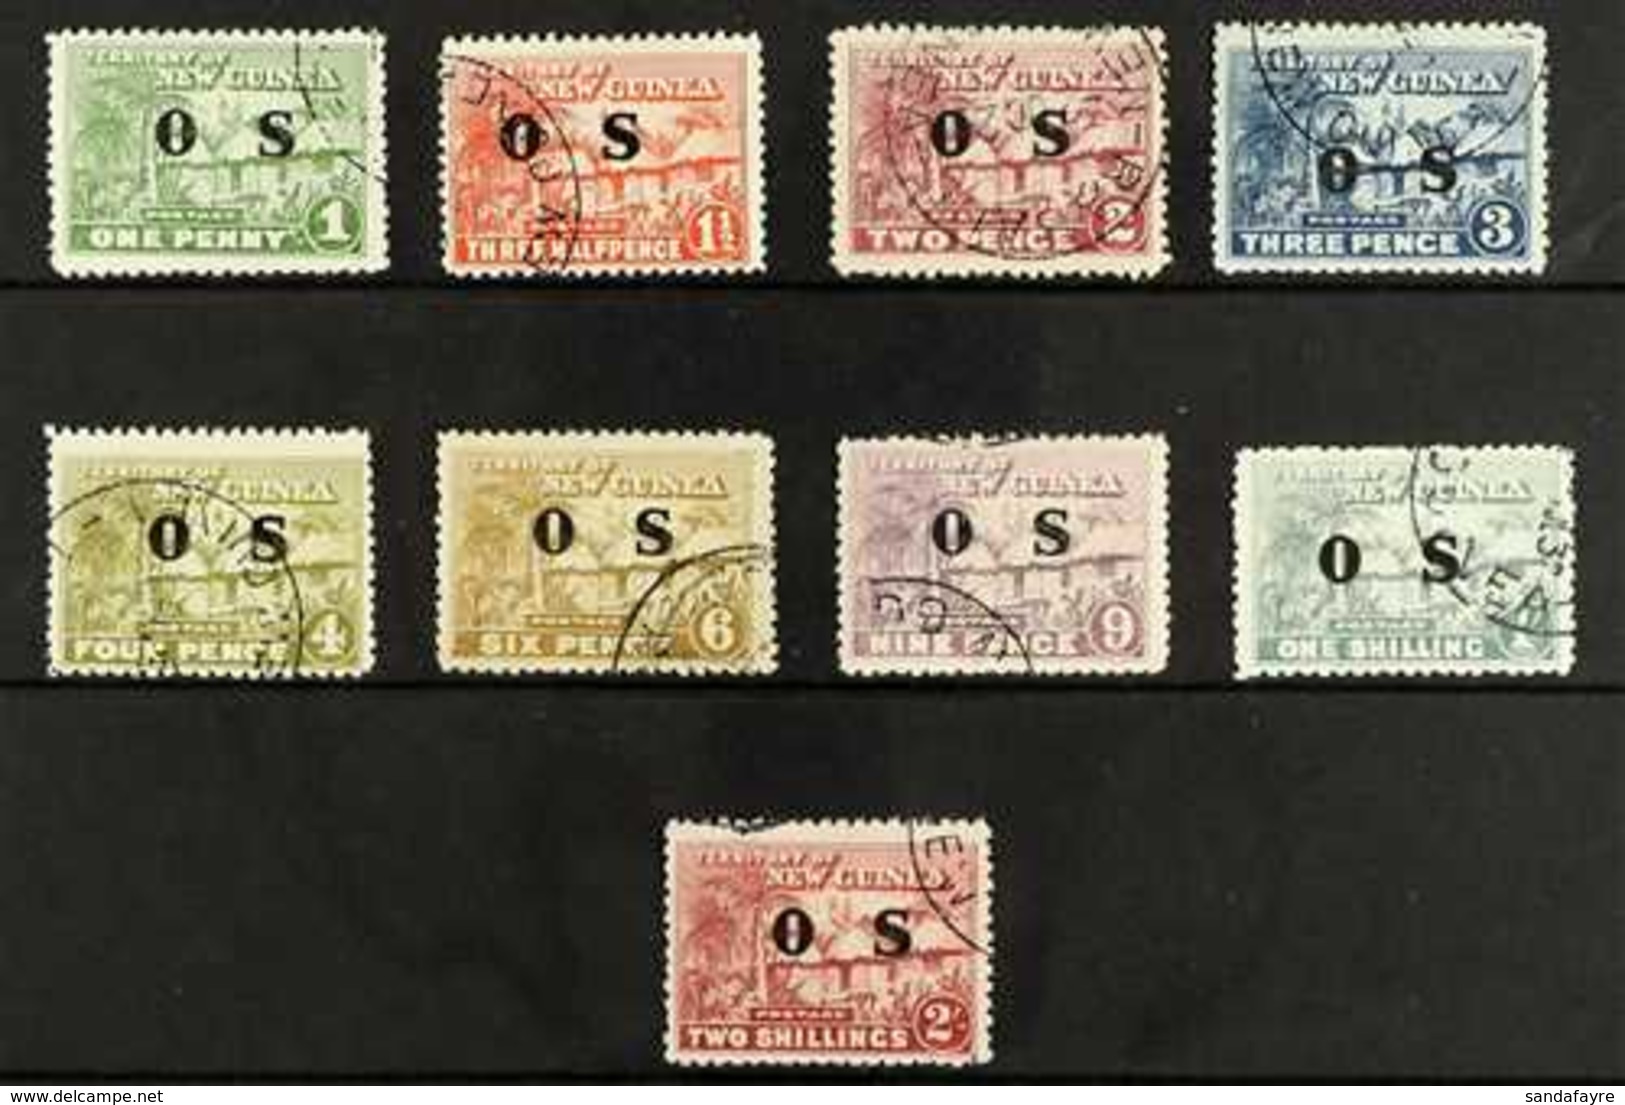 OFFICIALS 1925-31 Native Village With "O S" Overprints Complete Set, SG O22/30, Fine Cds Used, Fresh. (9 Stamps) For Mor - Papua Nuova Guinea